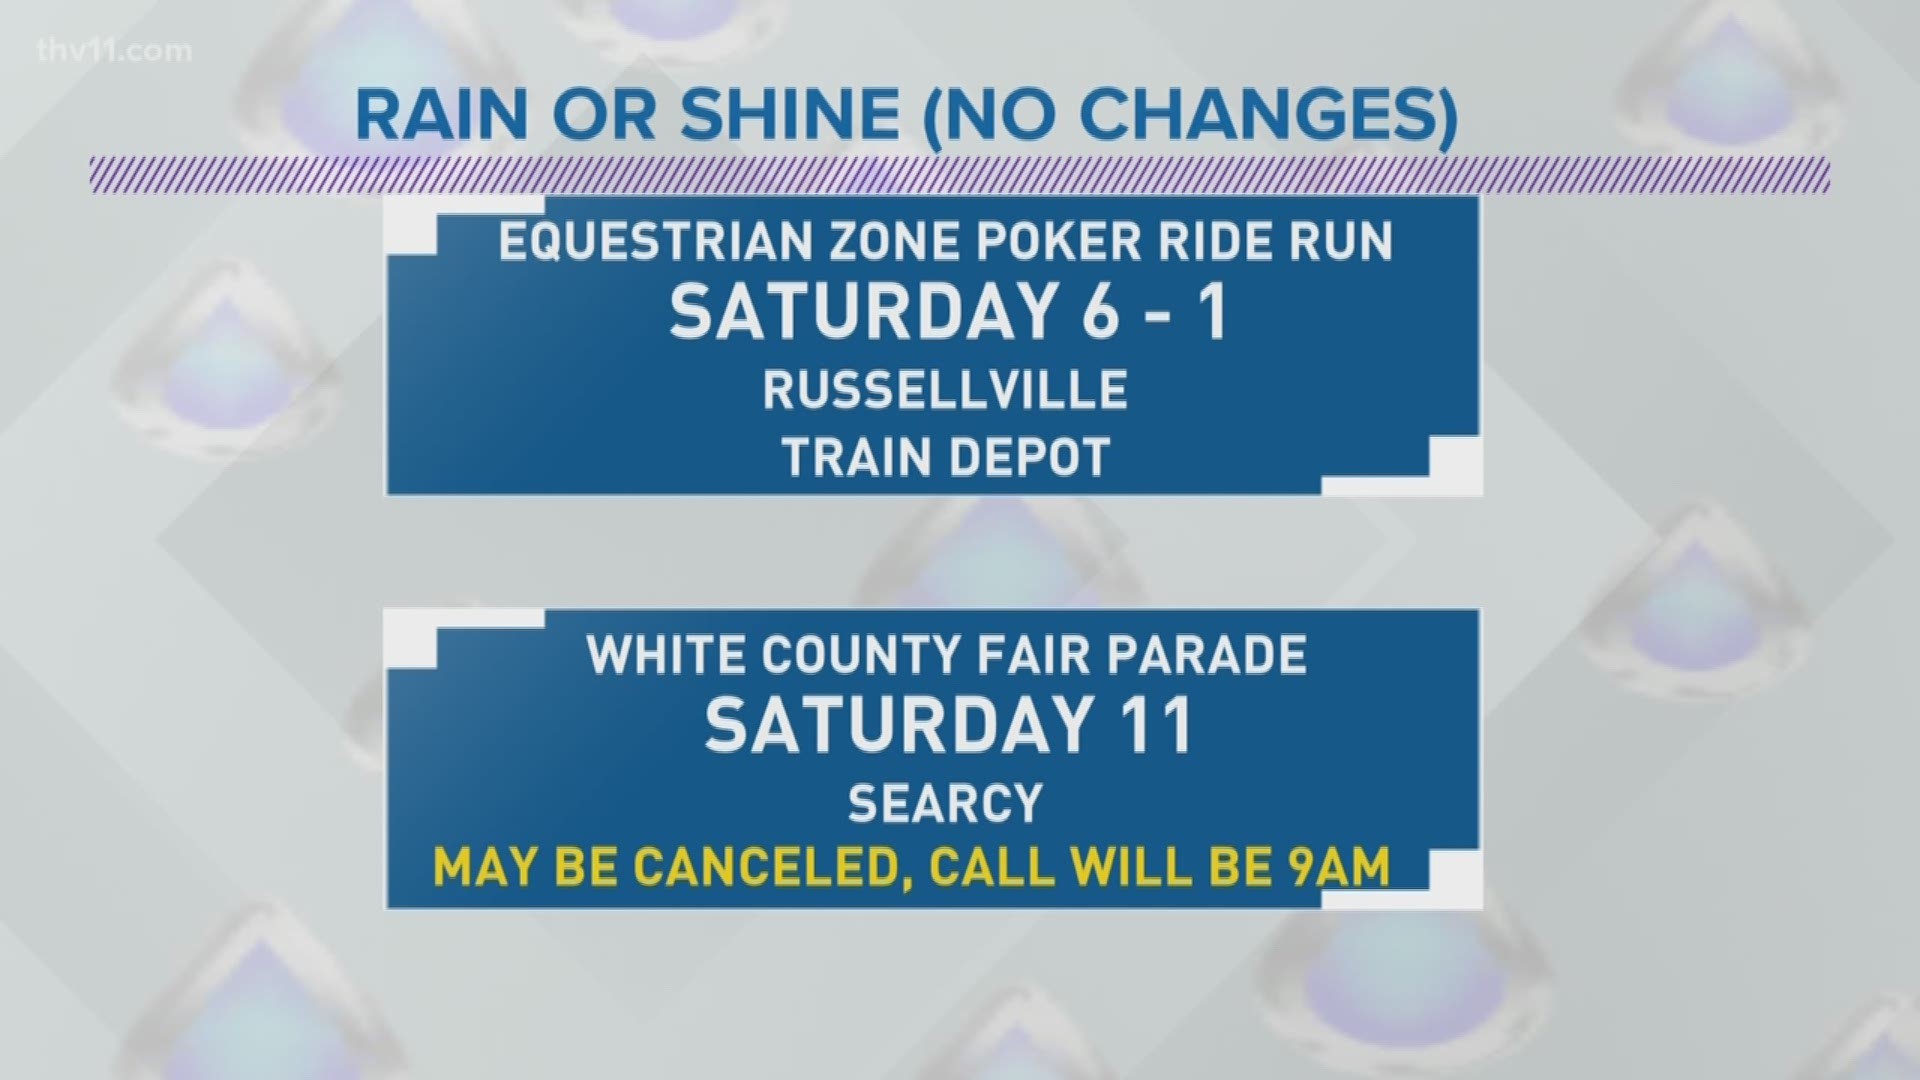 Nathan Scott shows us all the event changes this weekend because of the weather.